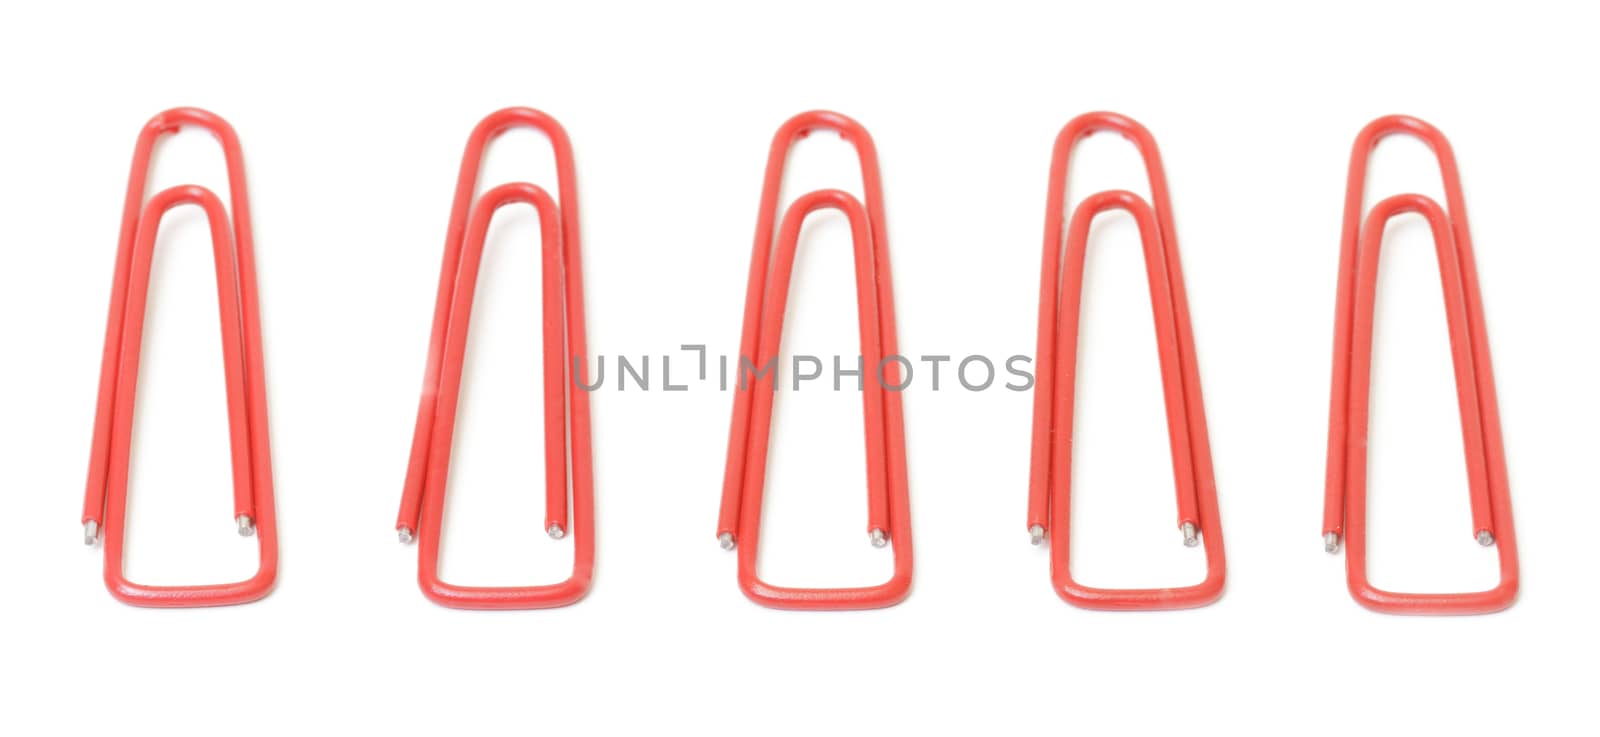 Red paper clips closeup by marslander